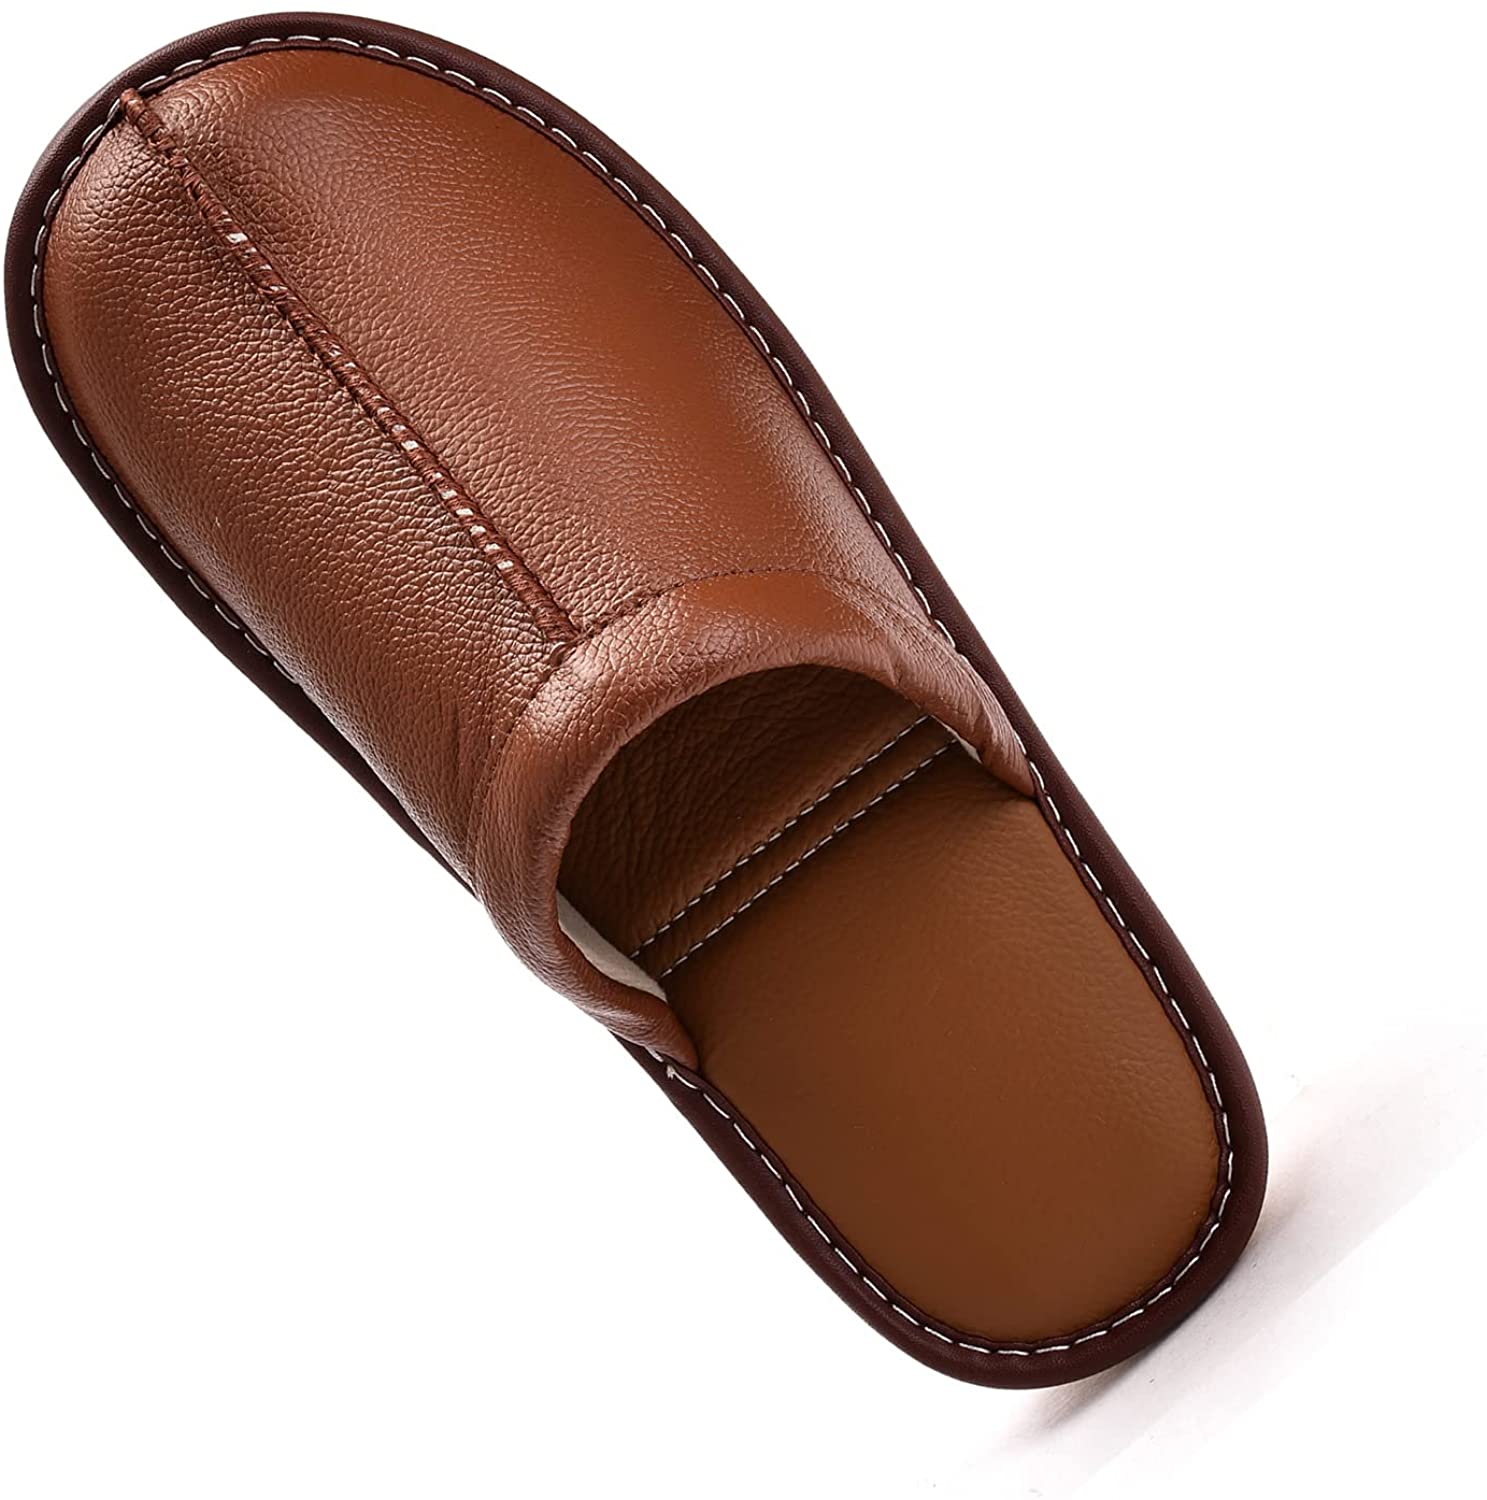 Shoes Mens Shoes Slippers Men's Slippers Brown Real Leather Comfy 